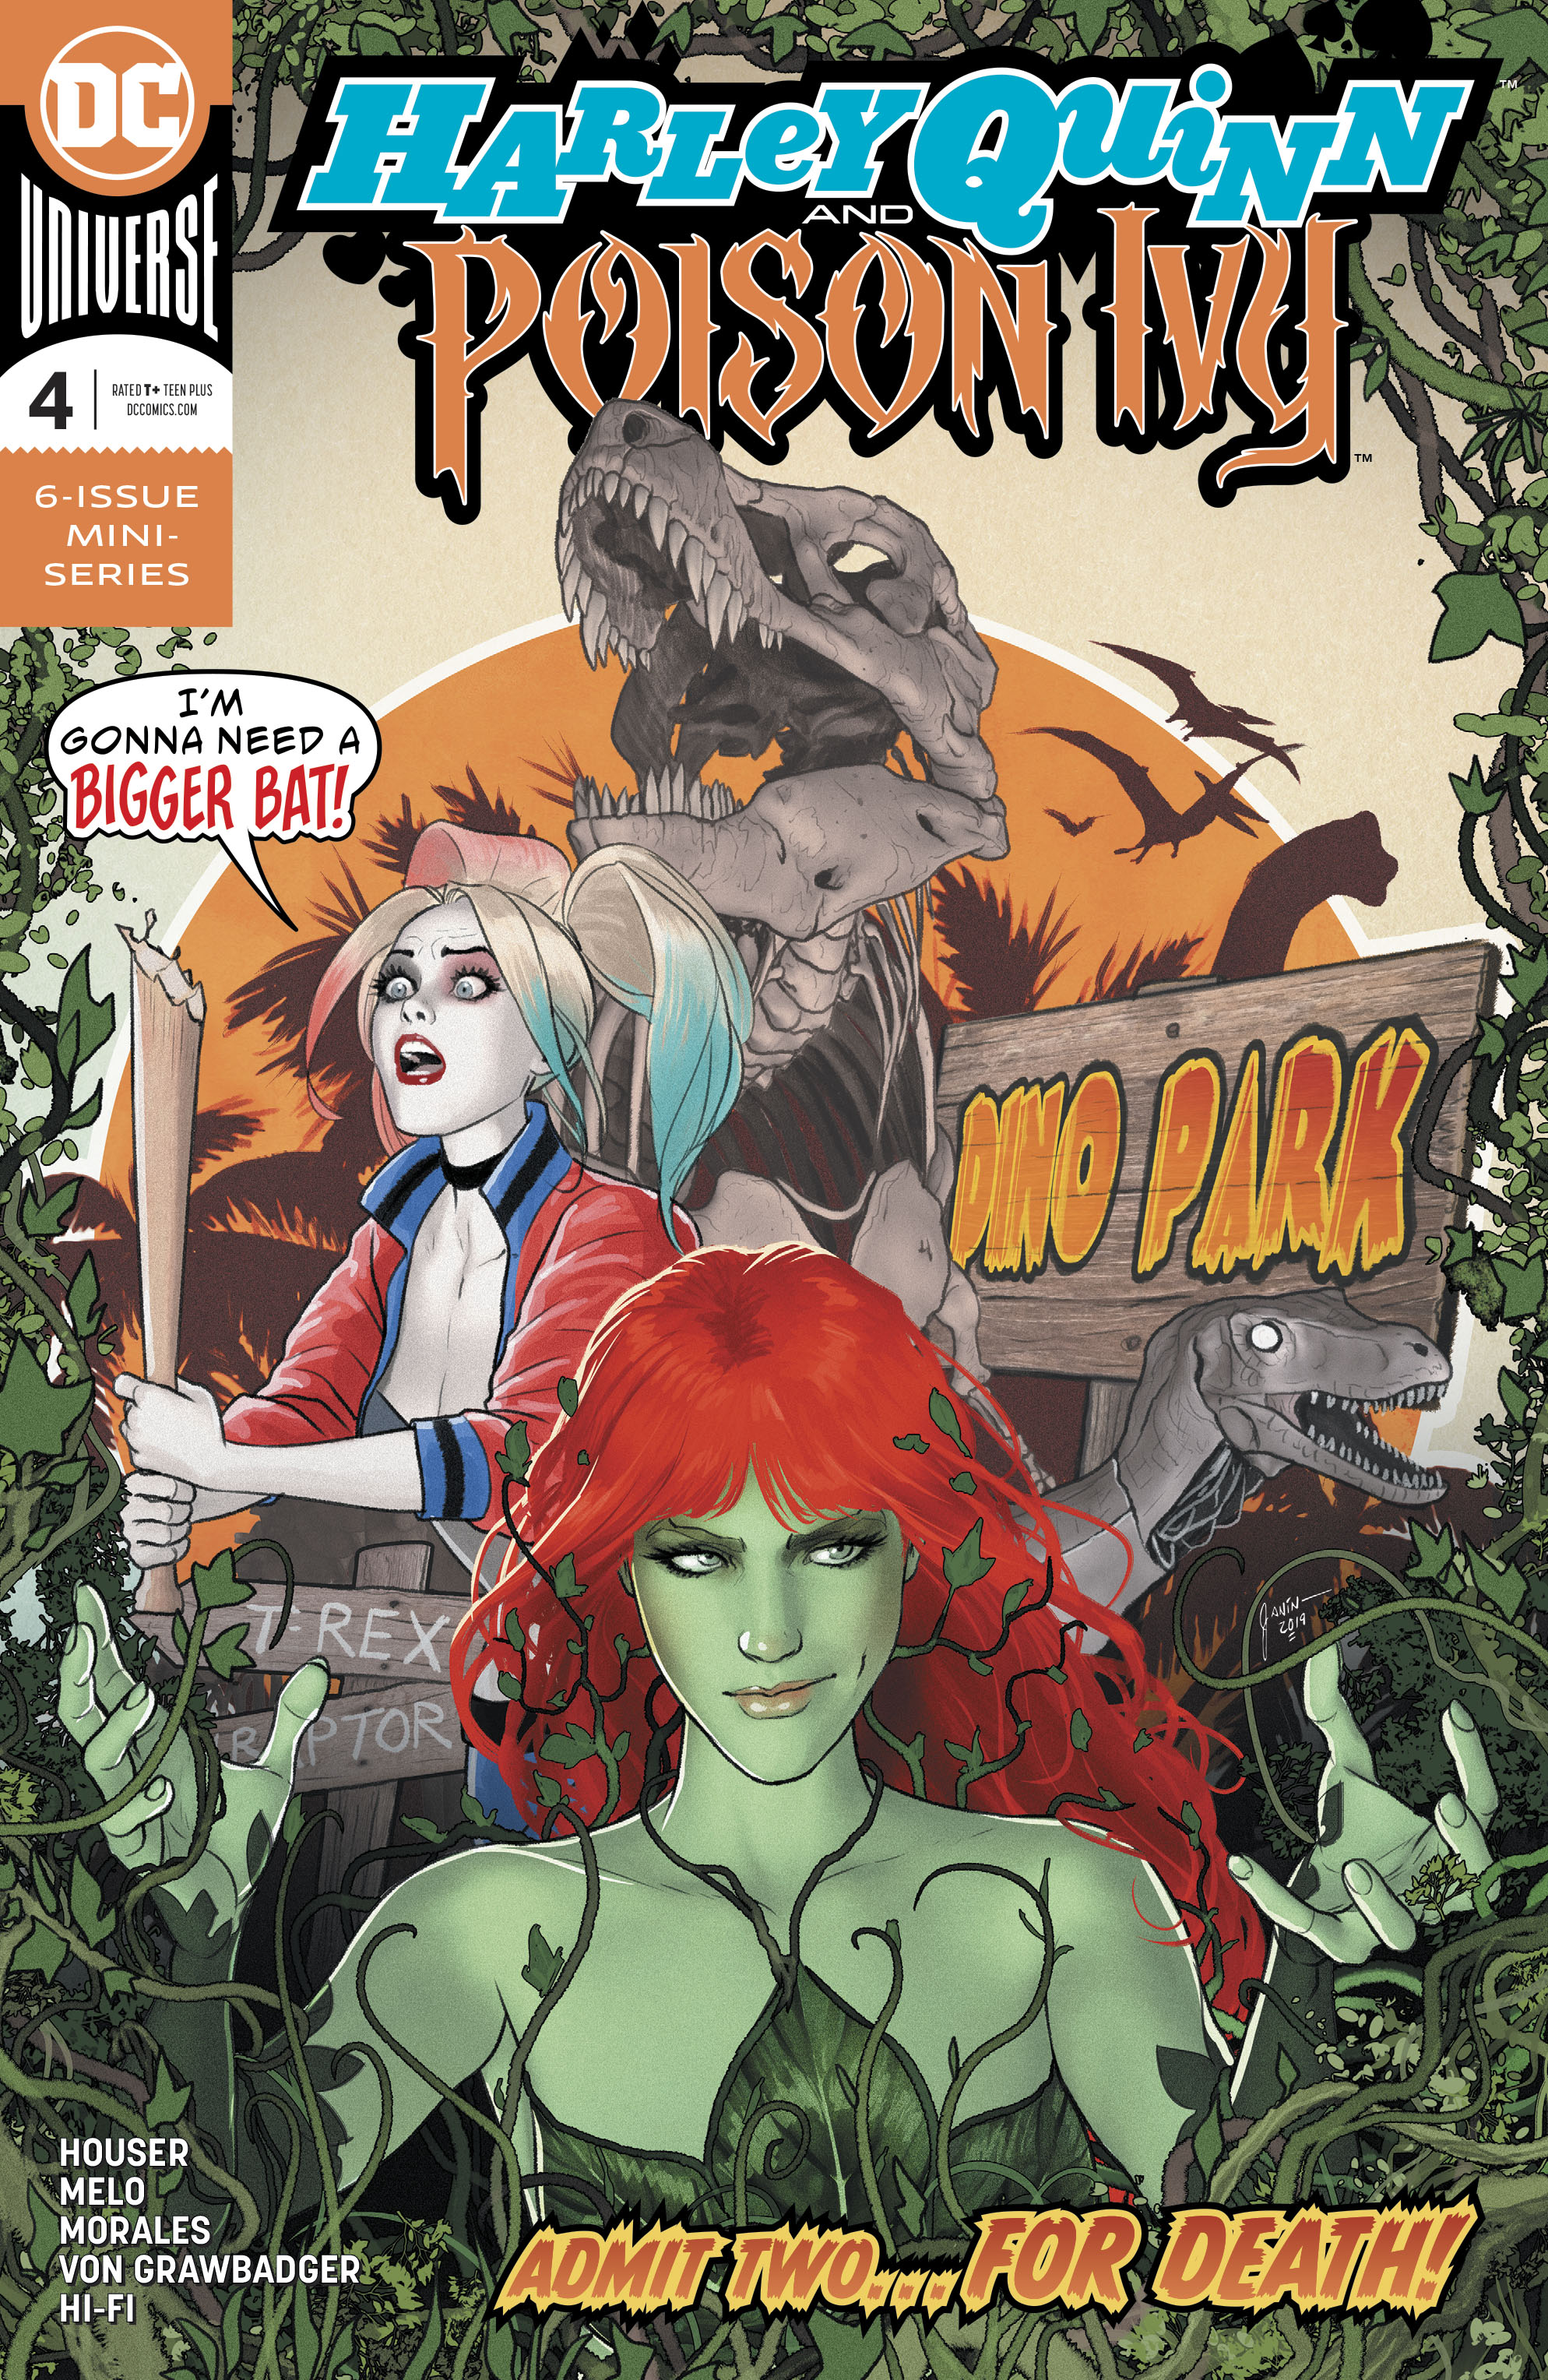 Read online Harley Quinn & Poison Ivy comic -  Issue #4 - 1